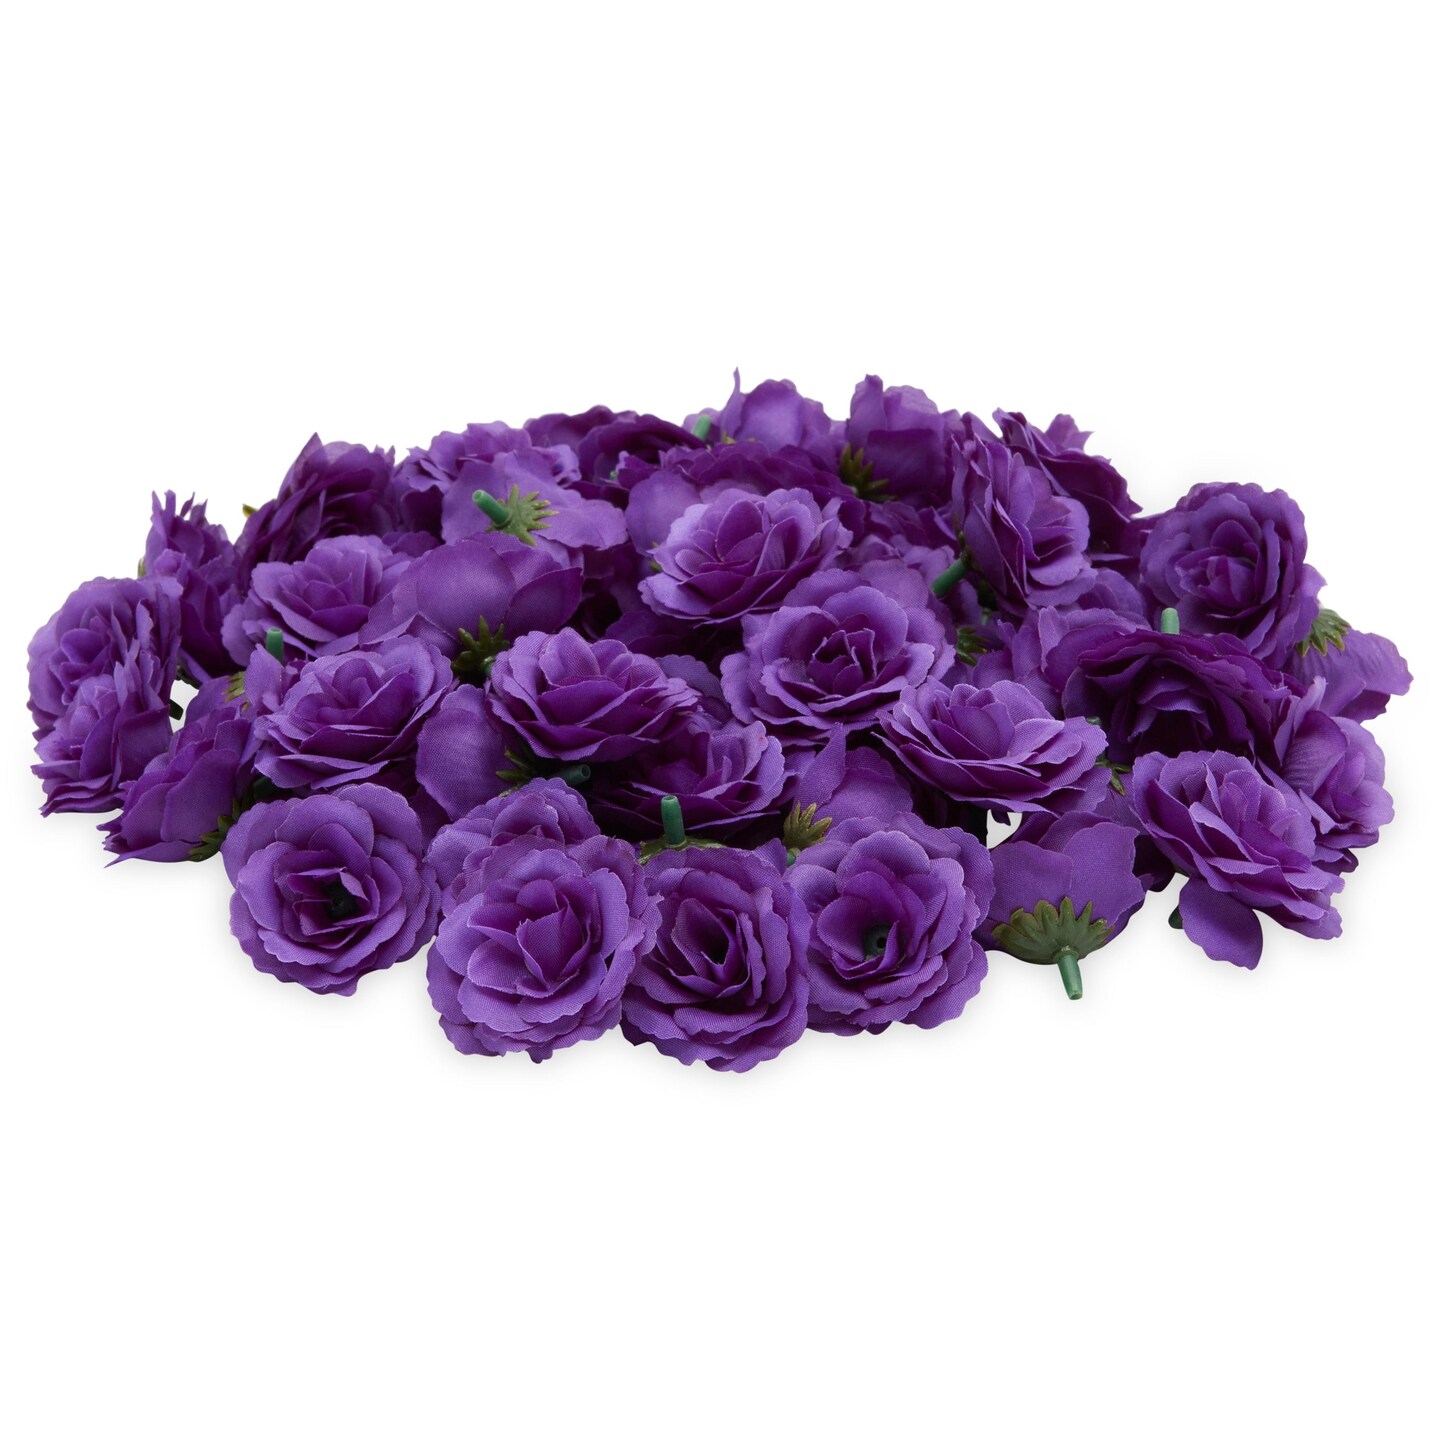 75 Pack Mini Artificial Purple Roses for Valentine&#x27;s Decorations, DIY Crafts, 2-Inch Stemless Flower Heads for Wall Decor, Weddings, Bouquets